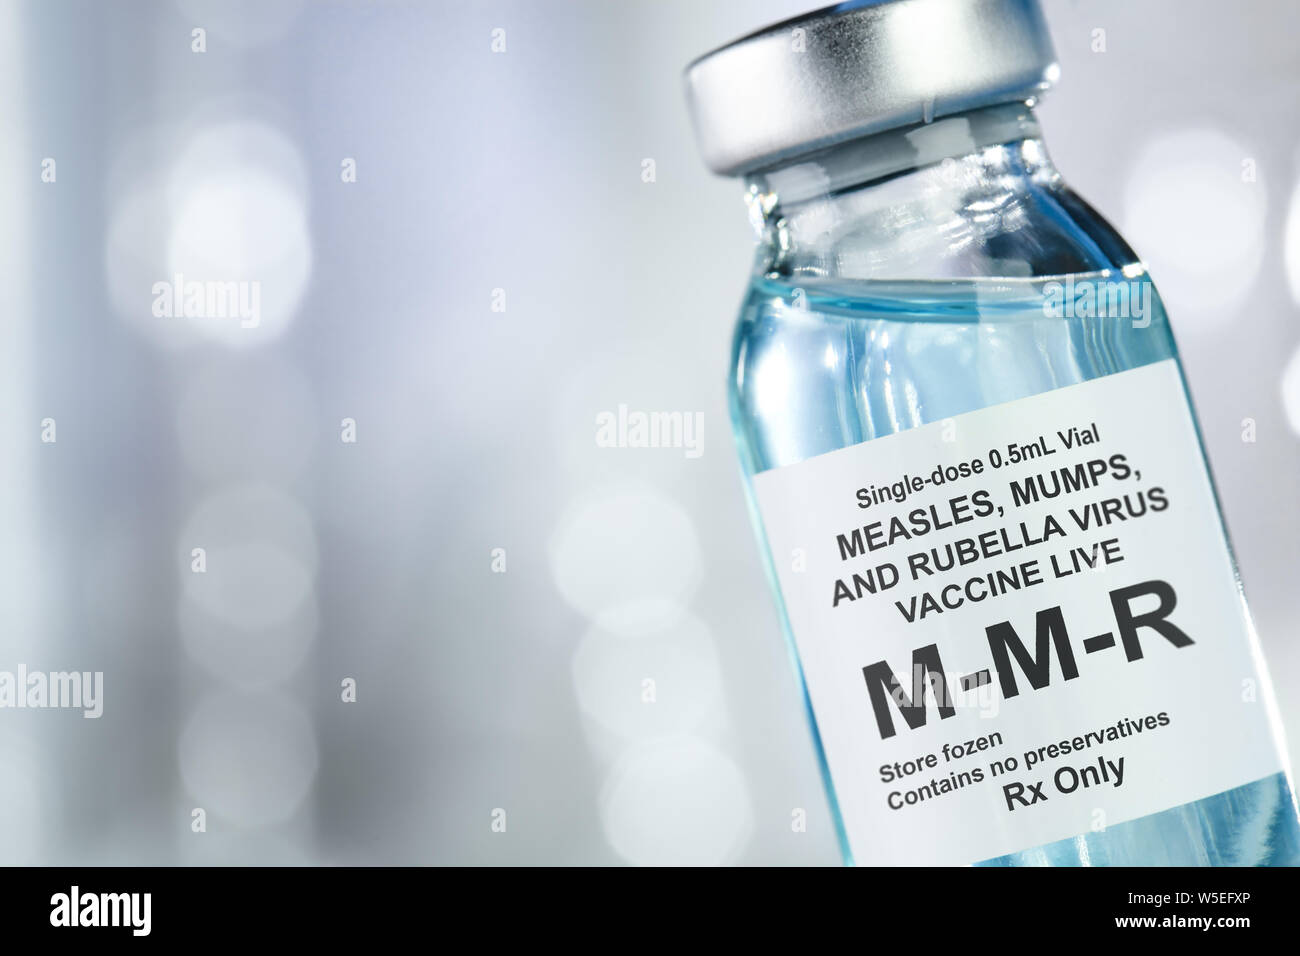 Small drug vial with MMR vaccine Stock Photo